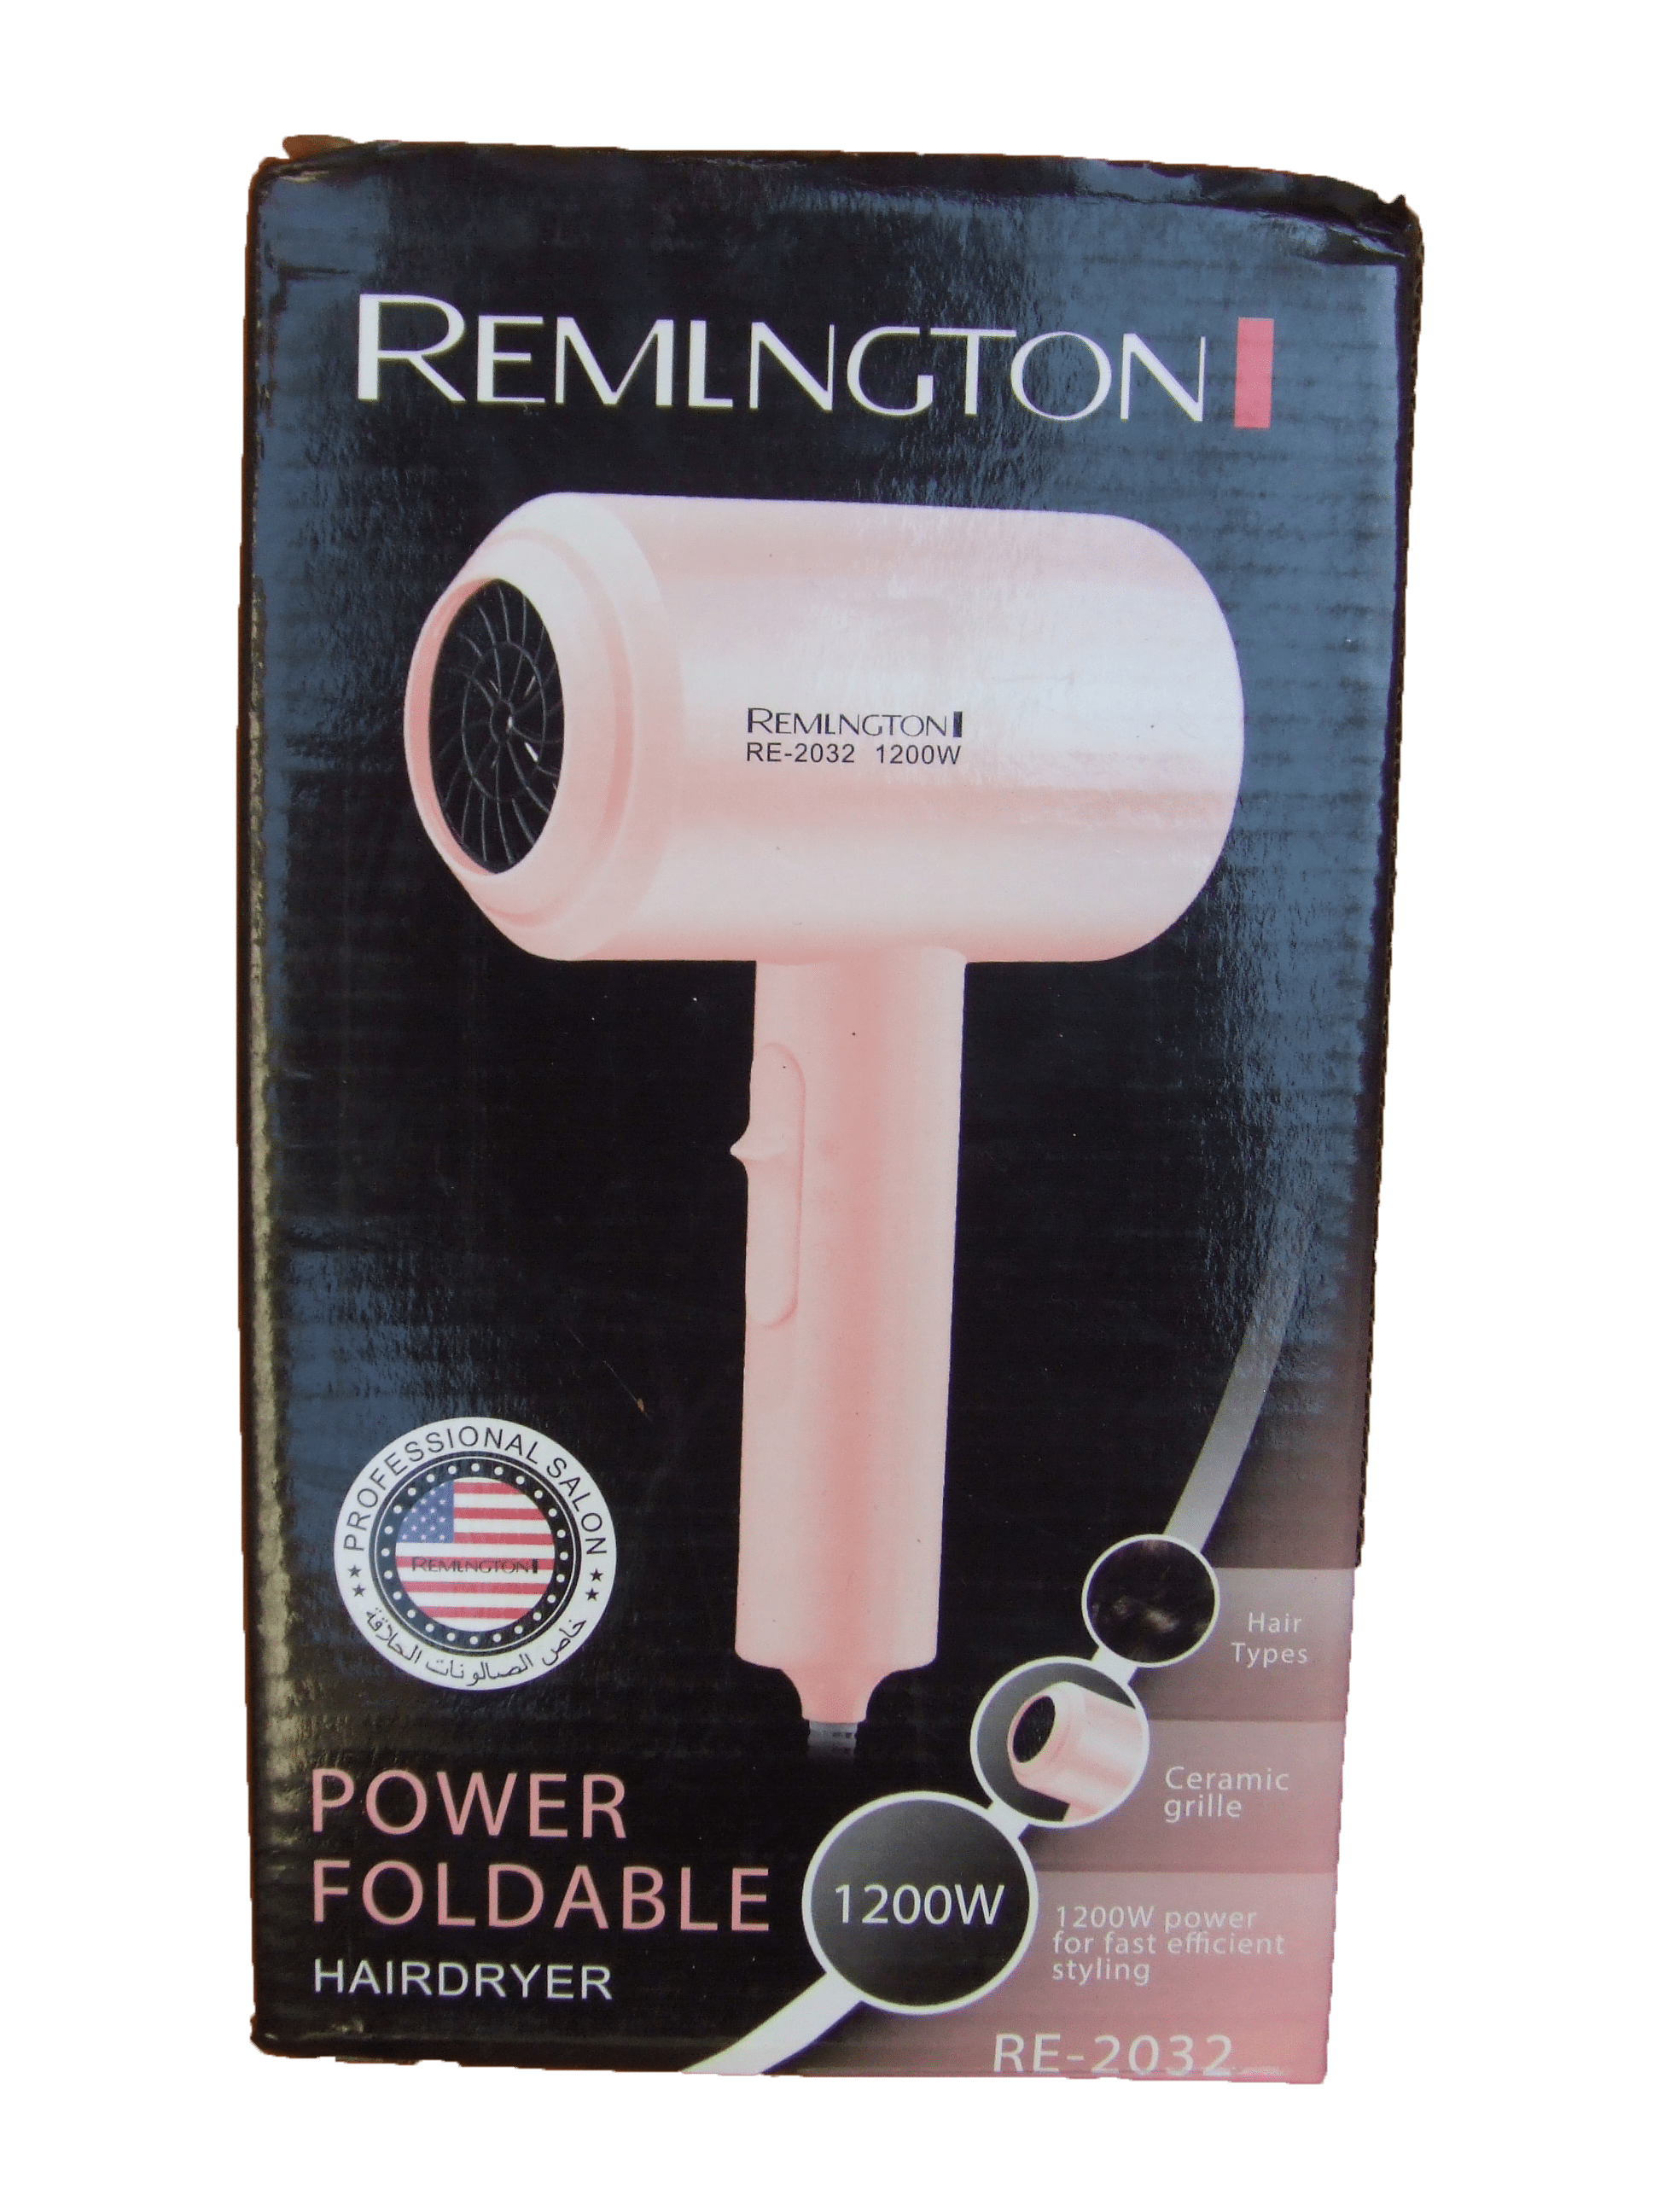 RE-2032 Hair Dryer REMLNGTON 1200W